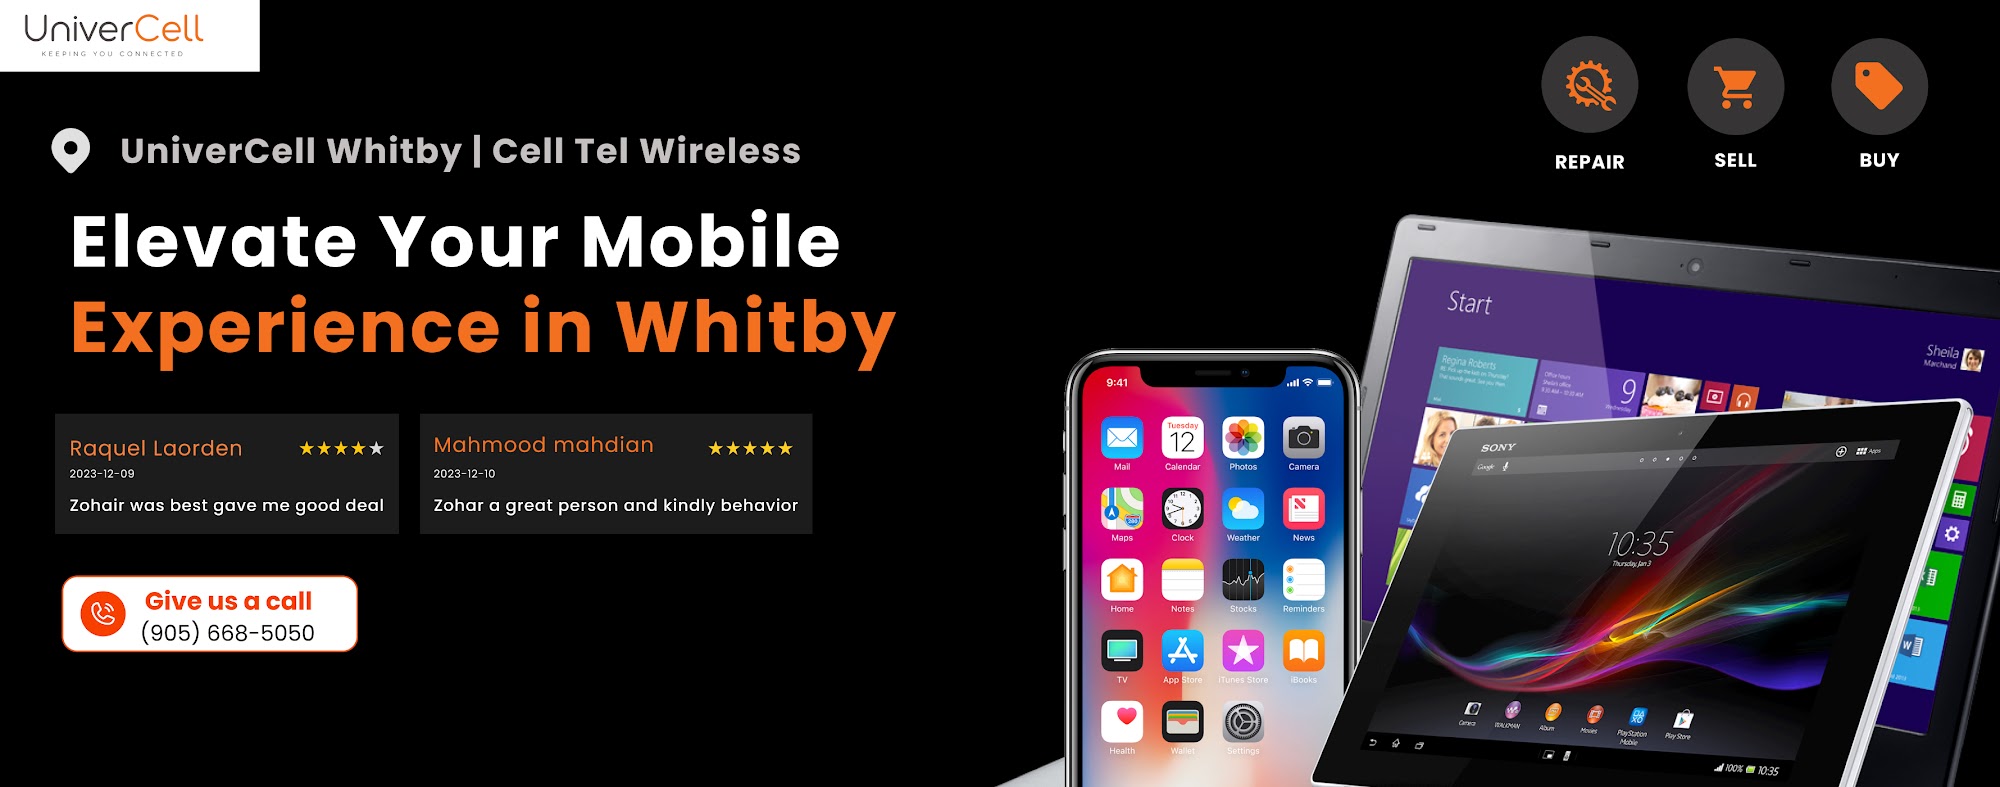 UniverCell Whitby | Cell Tel Wireless - Buy | Sell | Repair